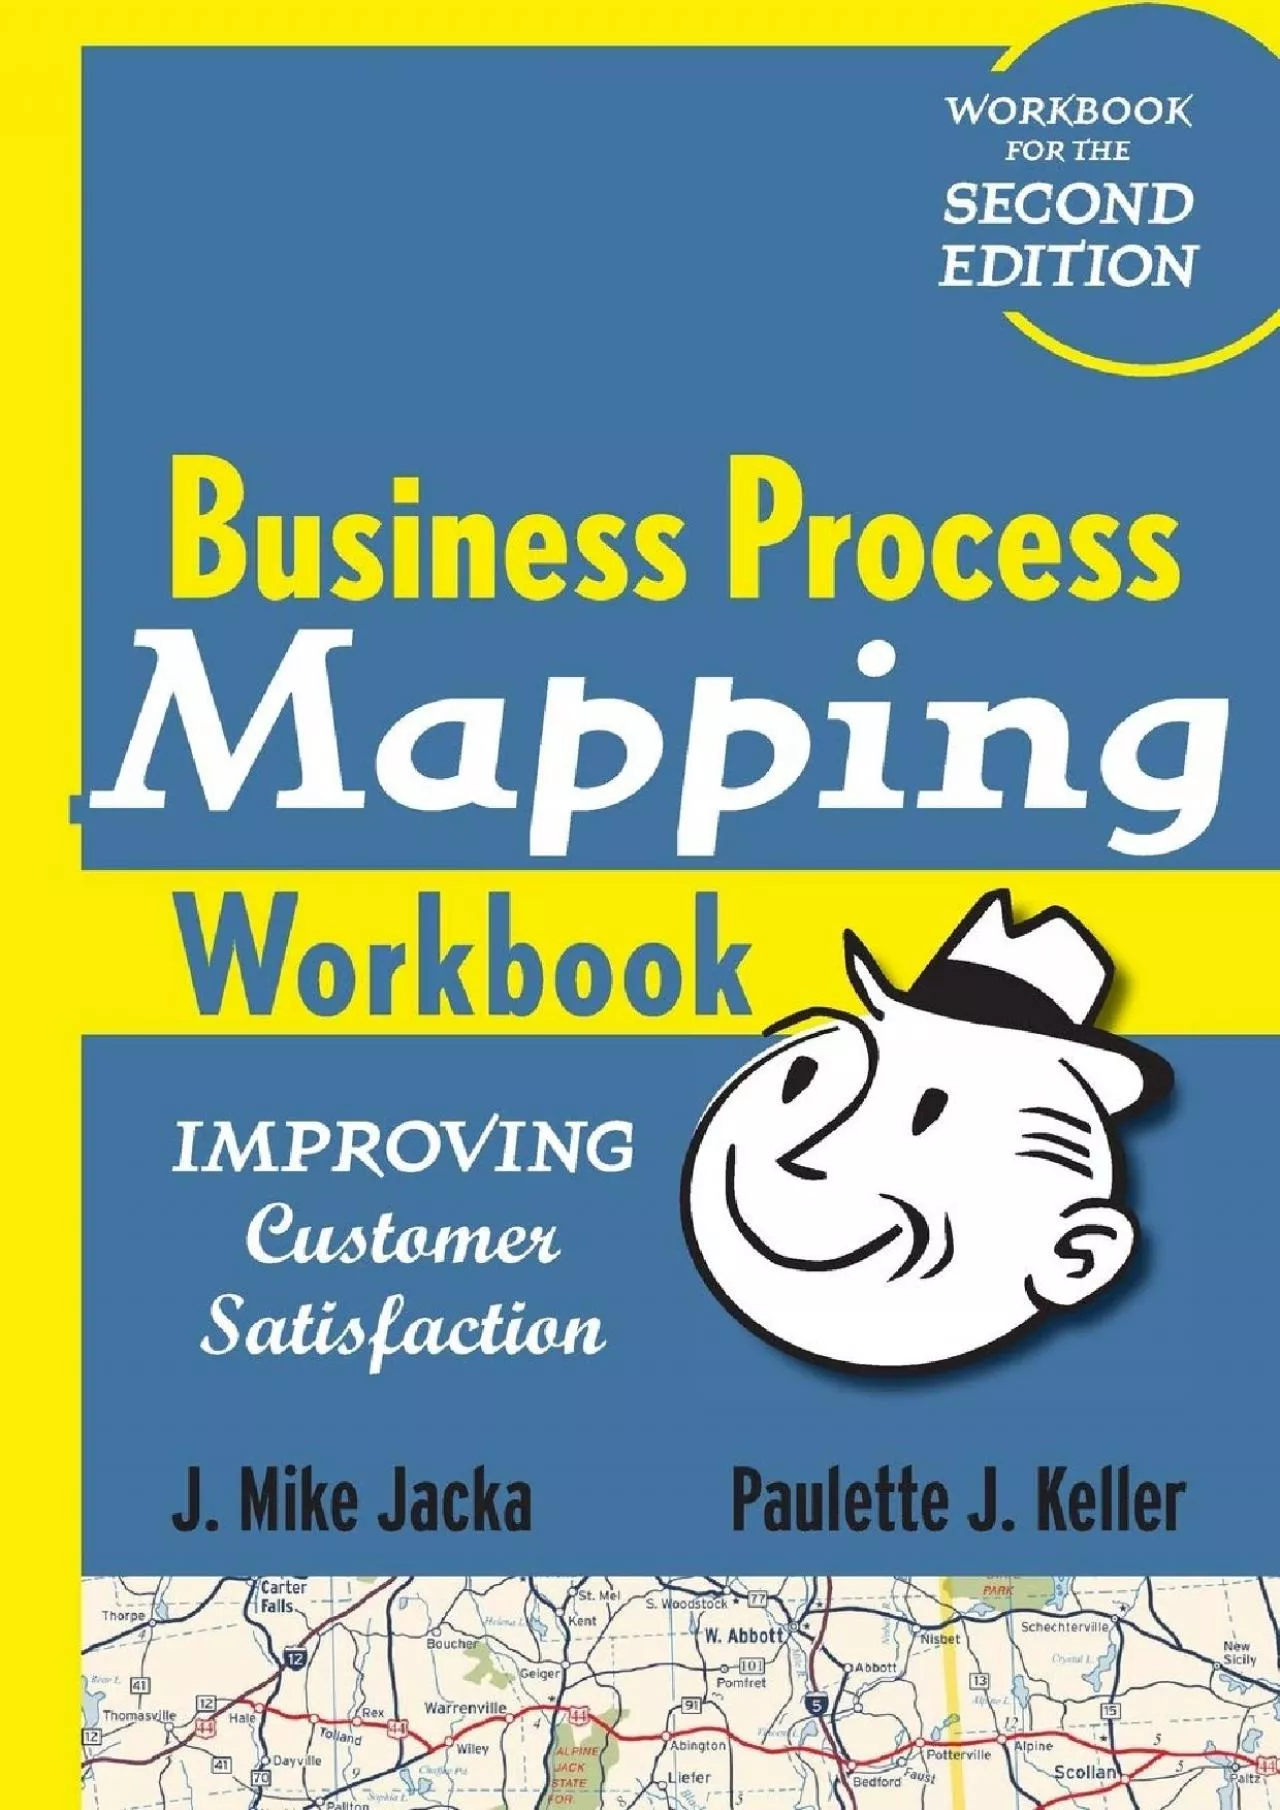 (EBOOK)-Business Process Mapping Workbook: Improving Customer Satisfaction